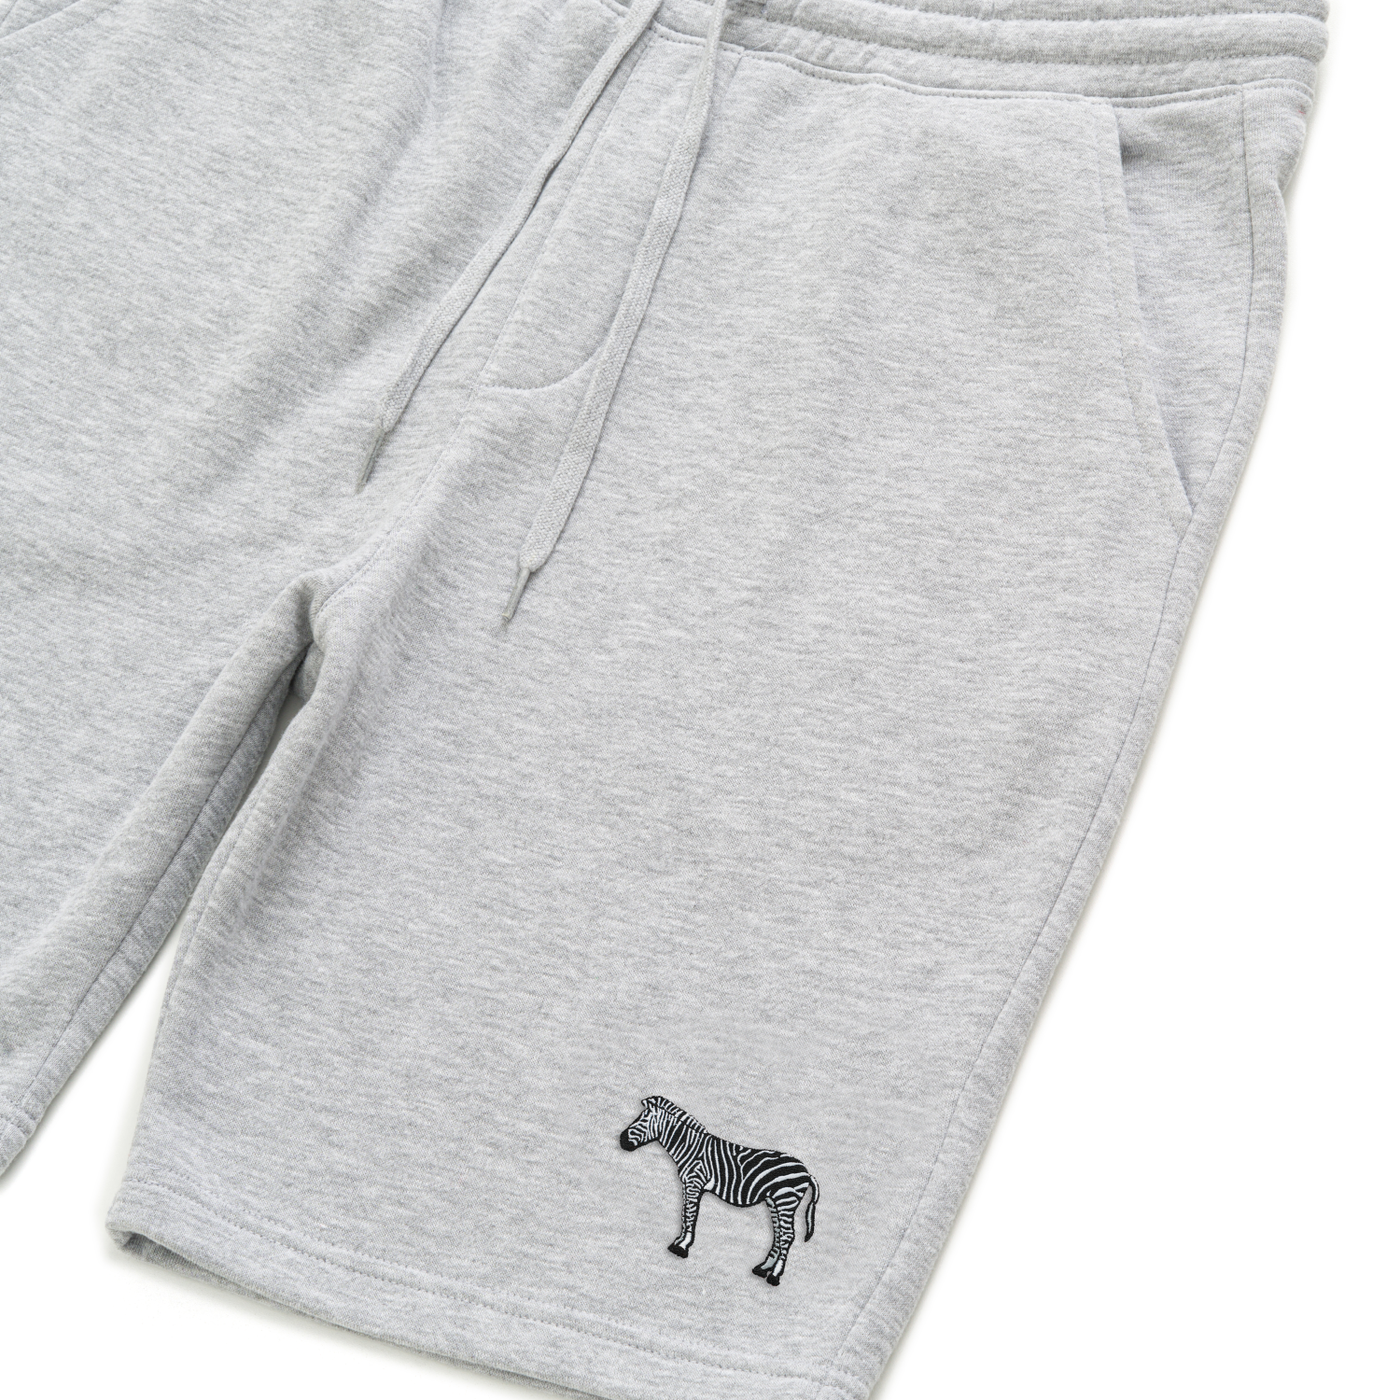 Bobby's Planet Men's Embroidered Zebra Shorts from African Animals Collection in Heather Grey Color#color_heather-grey